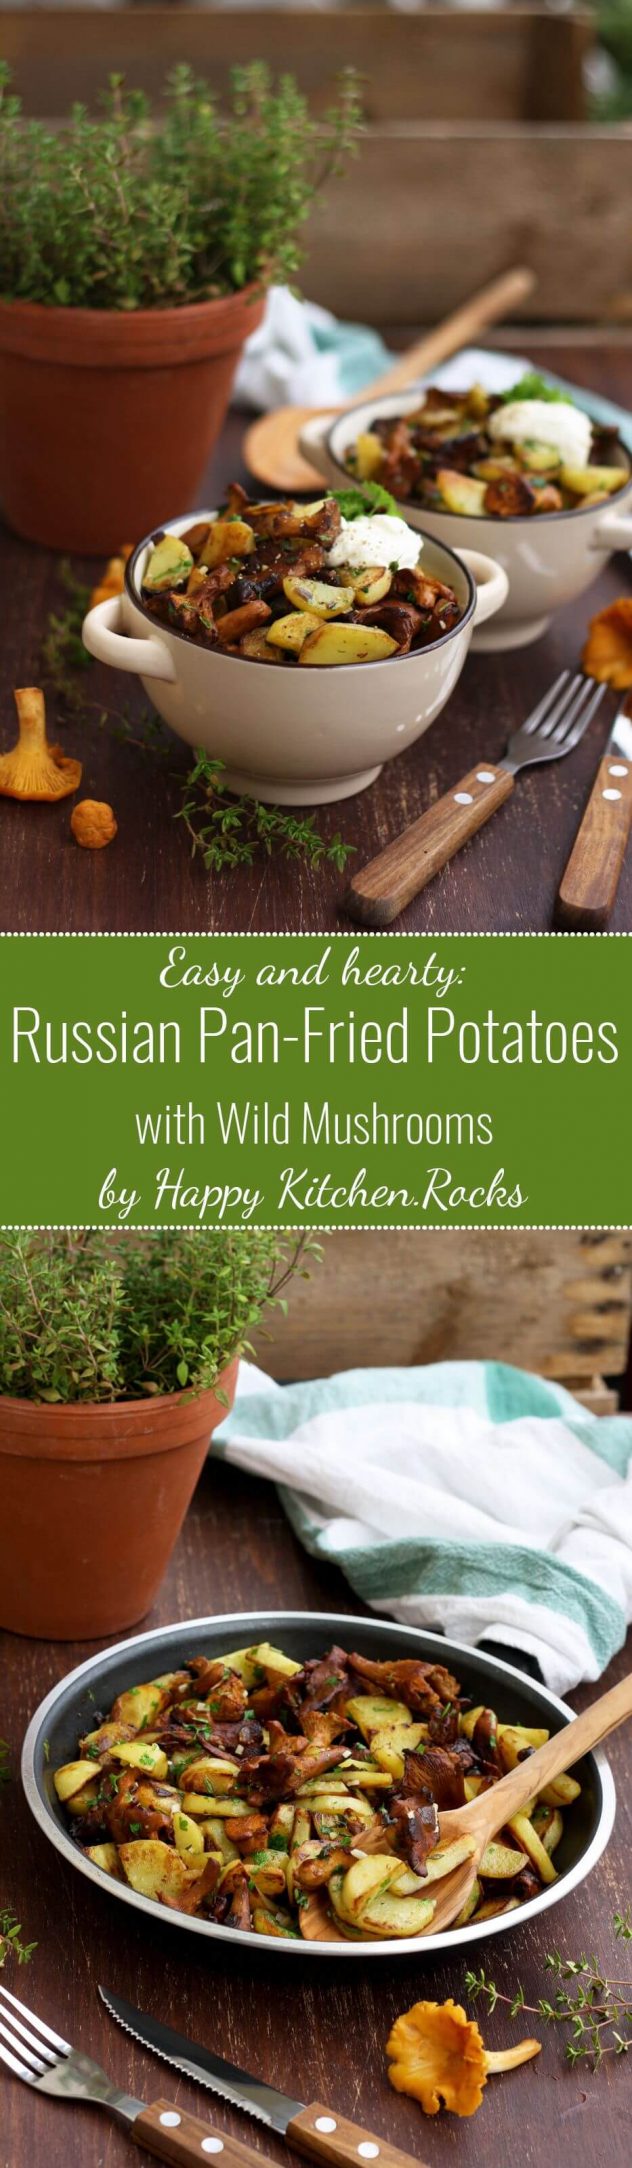 Russian pan-fried potatoes with wild mushrooms, onions, garlic and herbs are super flavorful, hearty and comforting. This easy step-by-step recipe only takes 30 minutes to make!